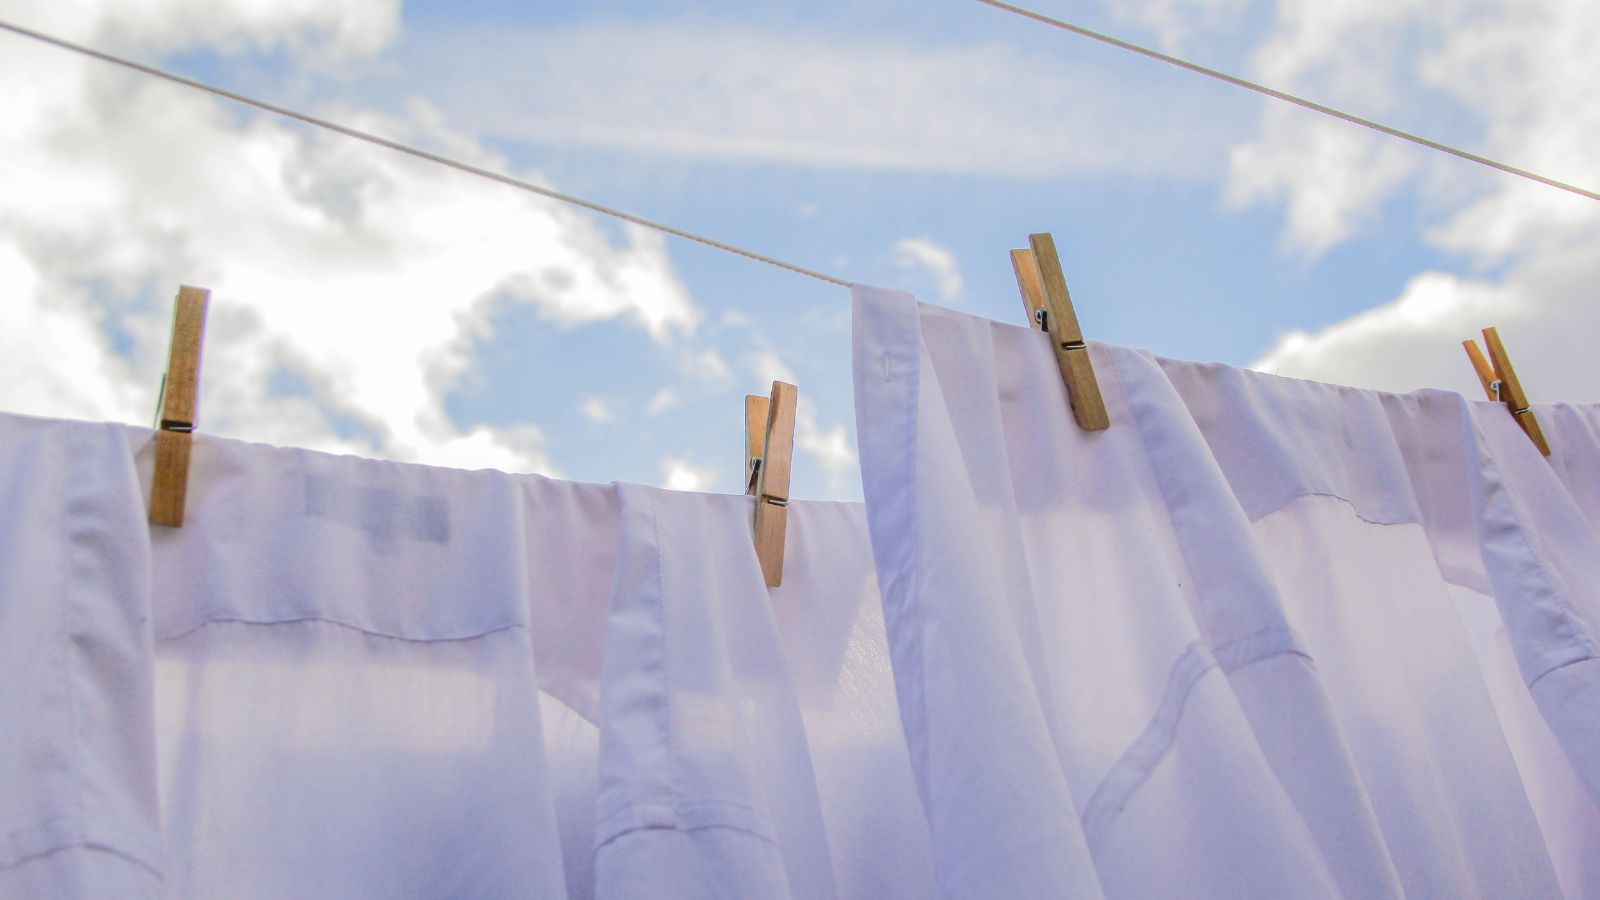 Fresh Clean Clothes Are Drying Outside. Clothes Hanging To Dry On